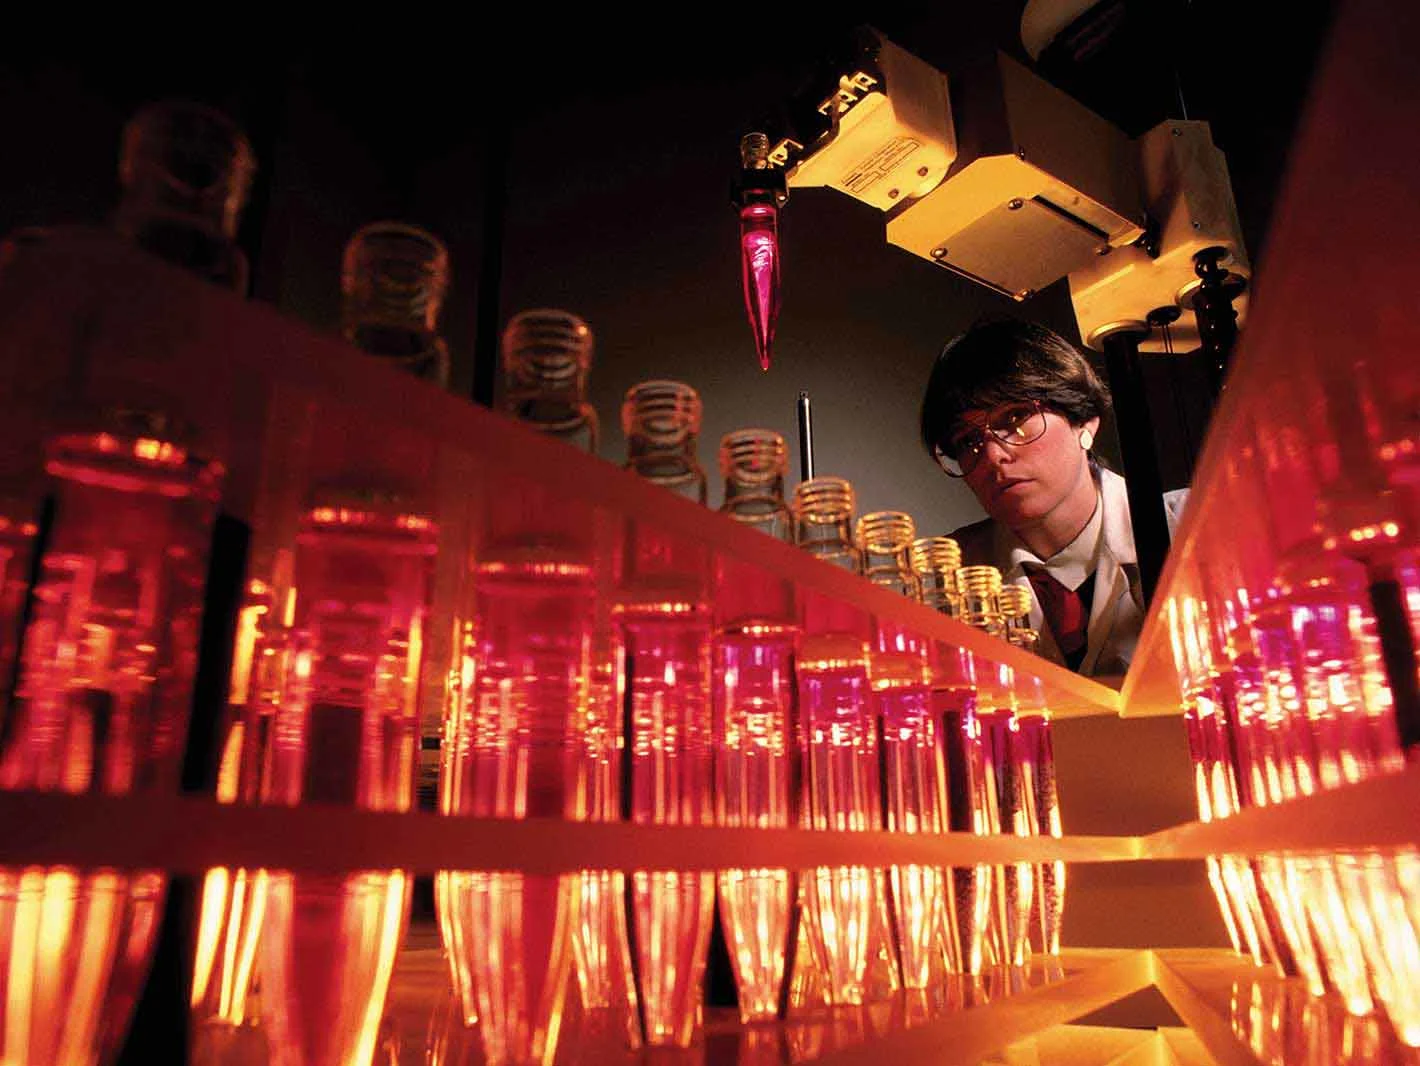 researcher looks over test tubes